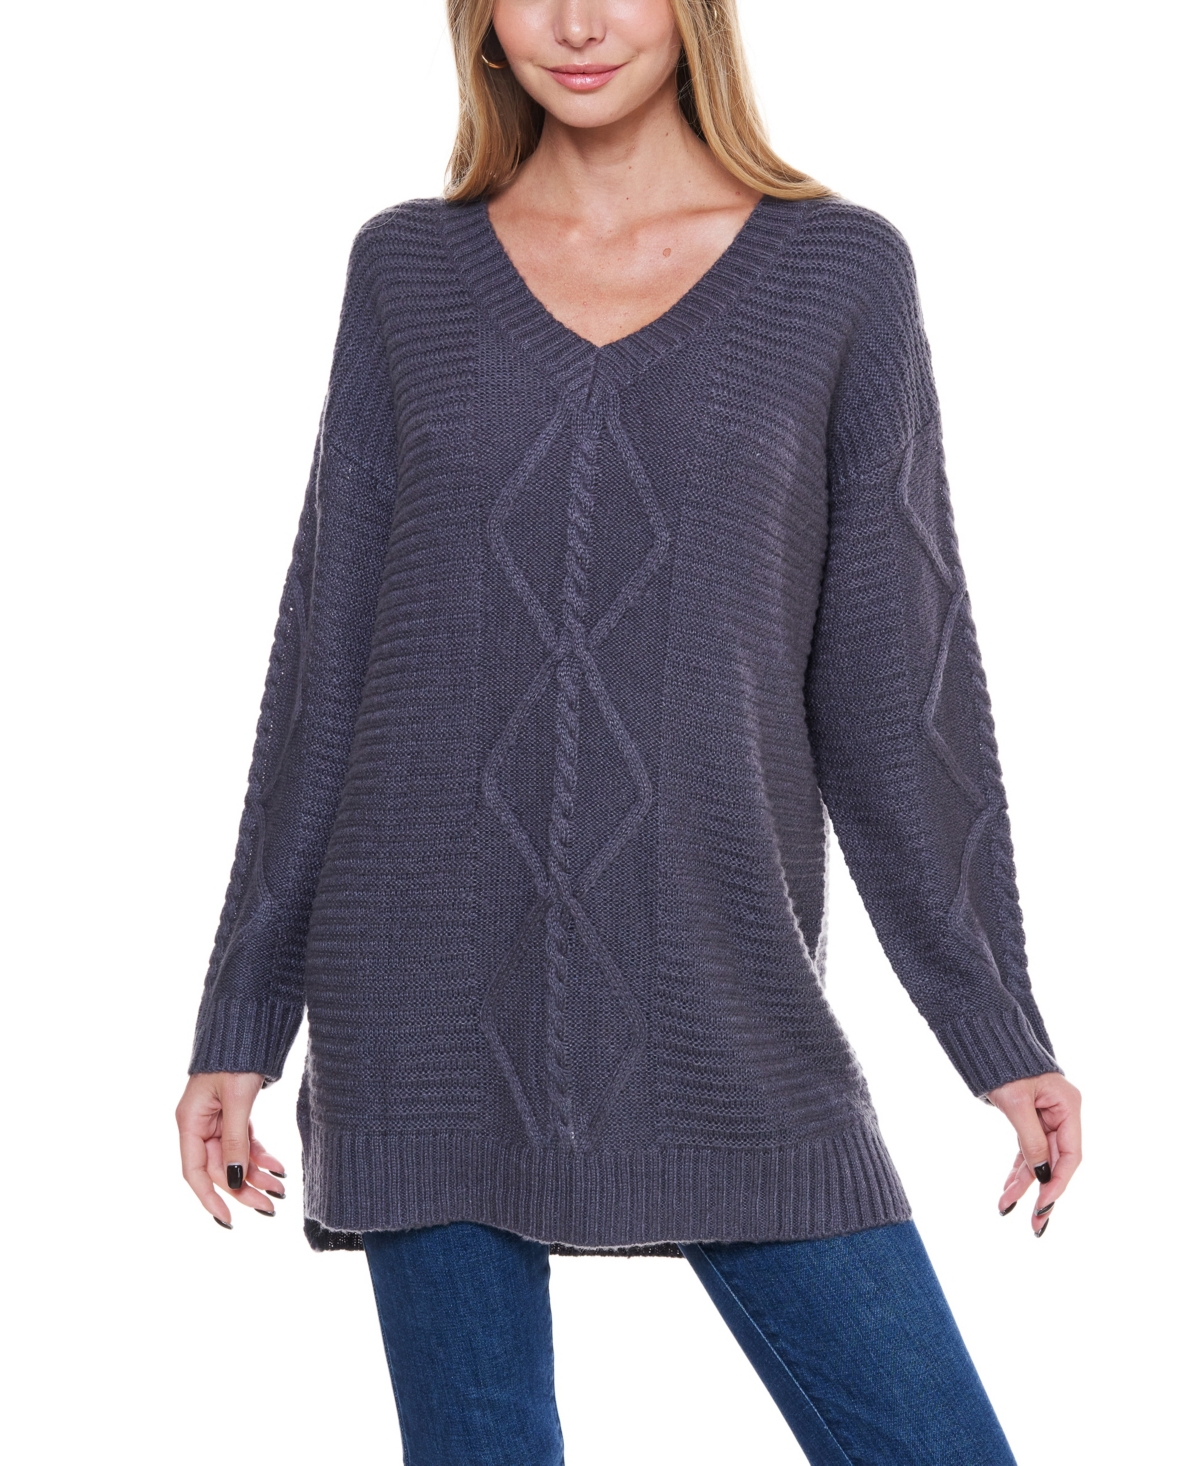 Fever Women's Rib and Cable Knit Long Sleeve V-Neck Sweater